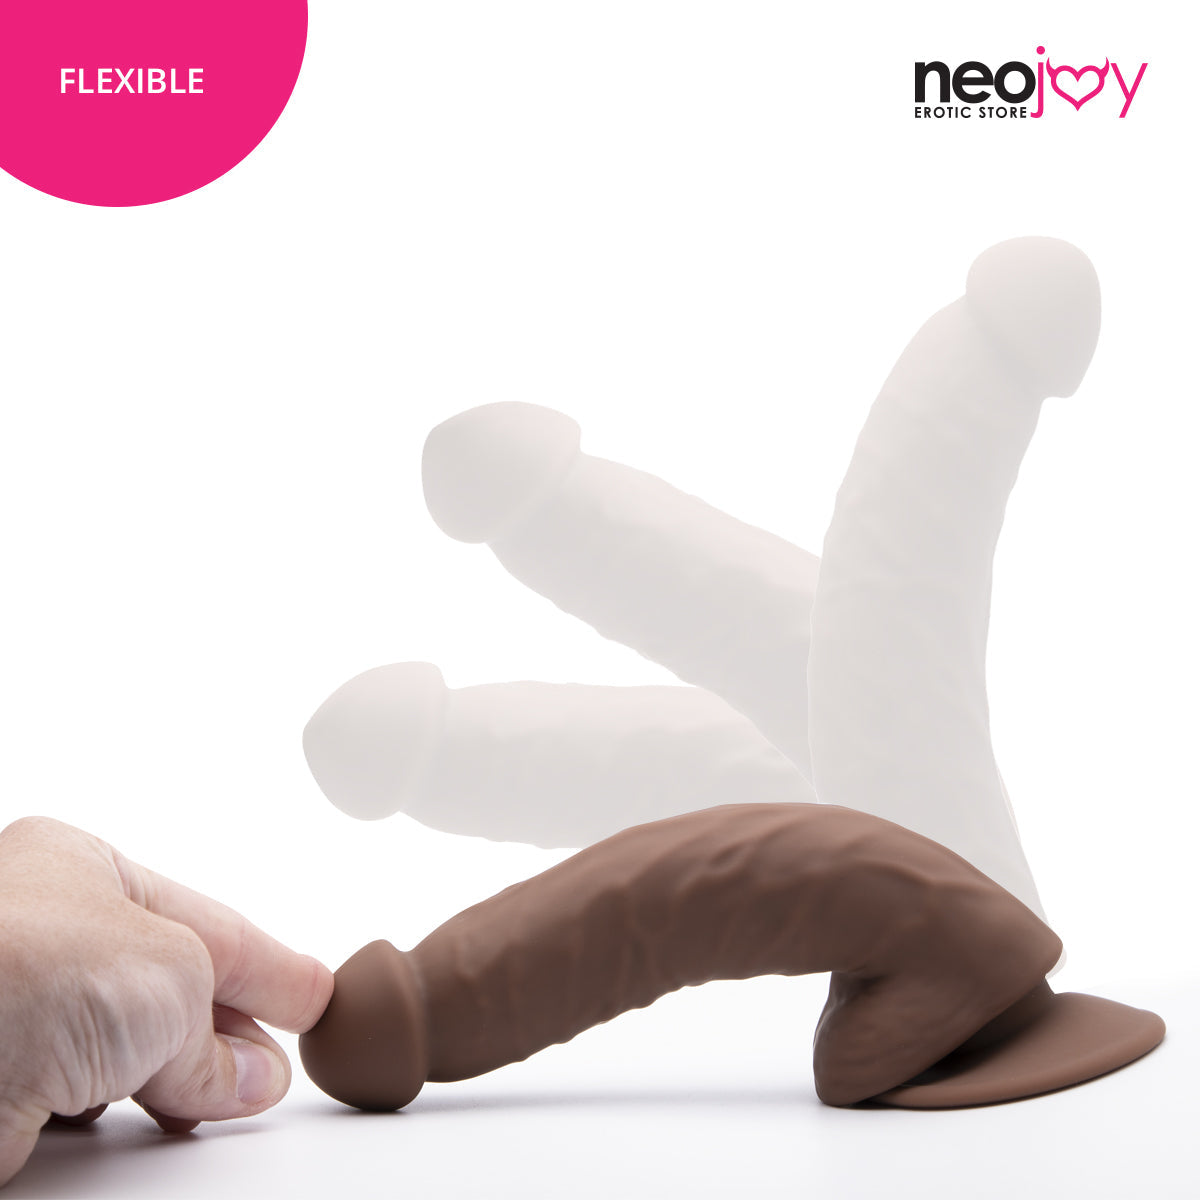 Neojoy - Curved Charmer Dildo With Strap-On Dong Harness - Brown - 21.4cm - 8.4 inch